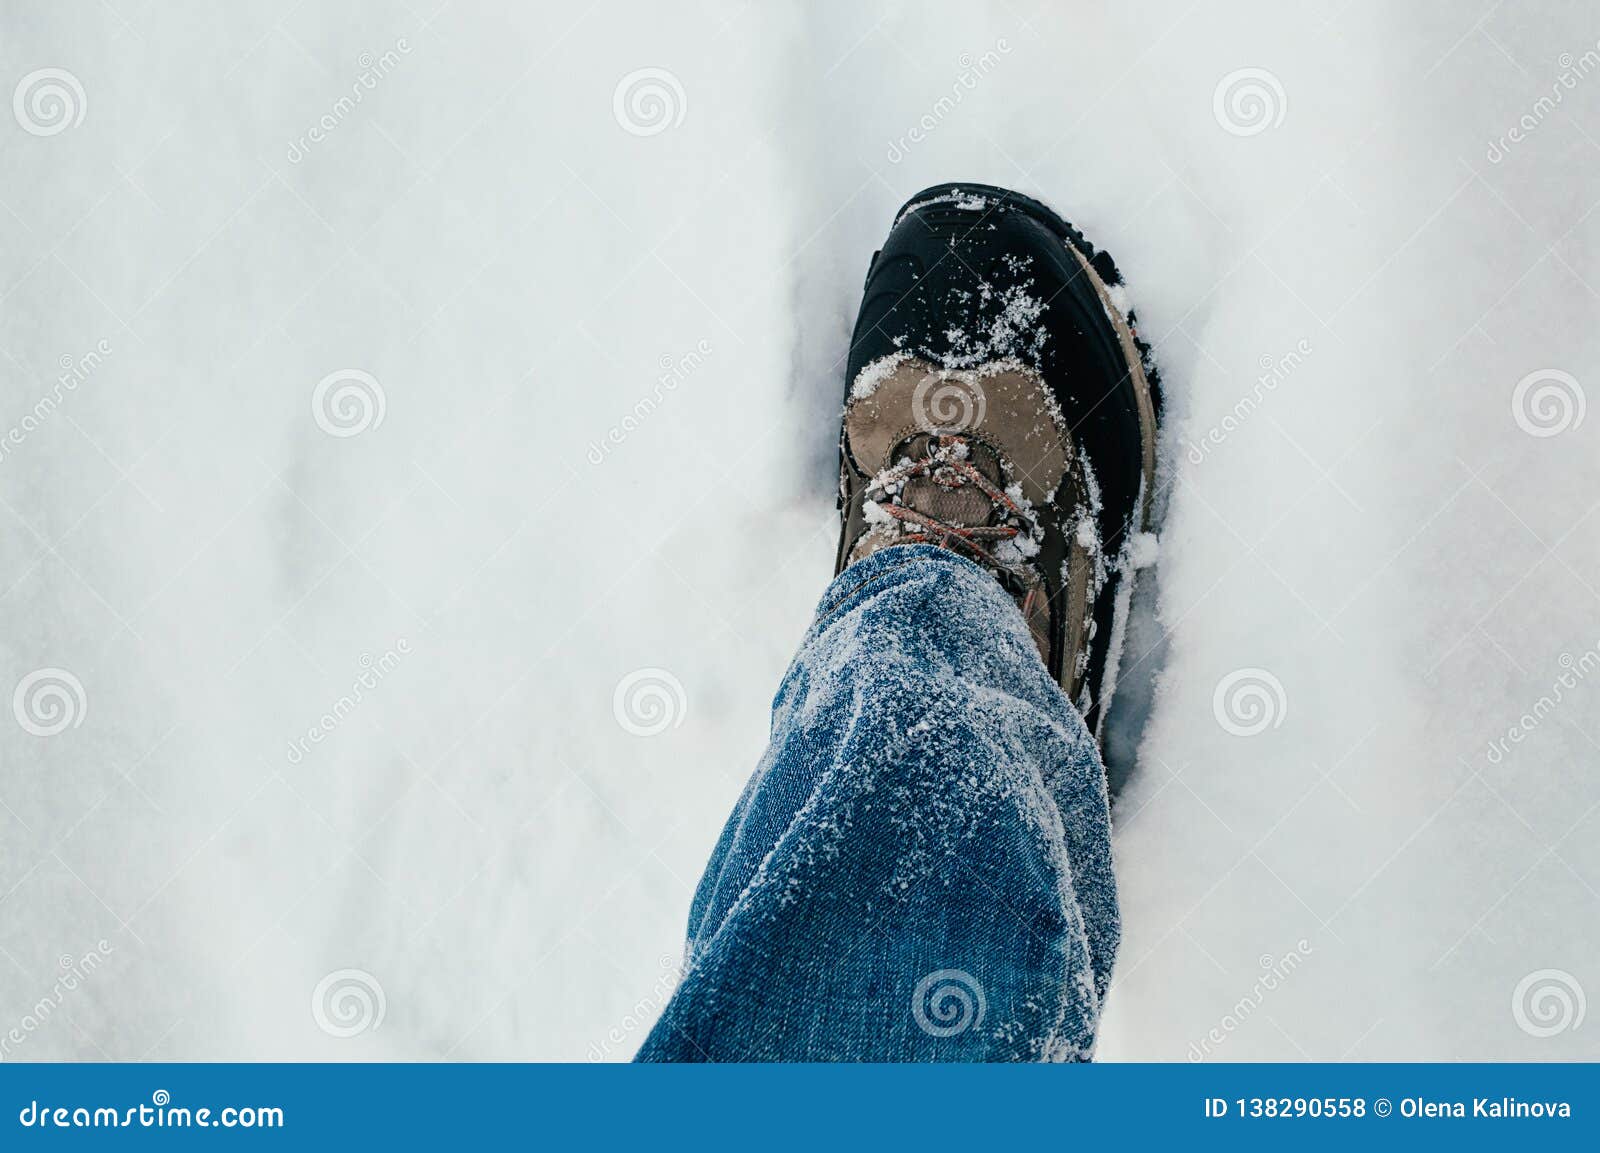 Male leg walking in snow stock photo. Image of snow - 138290558